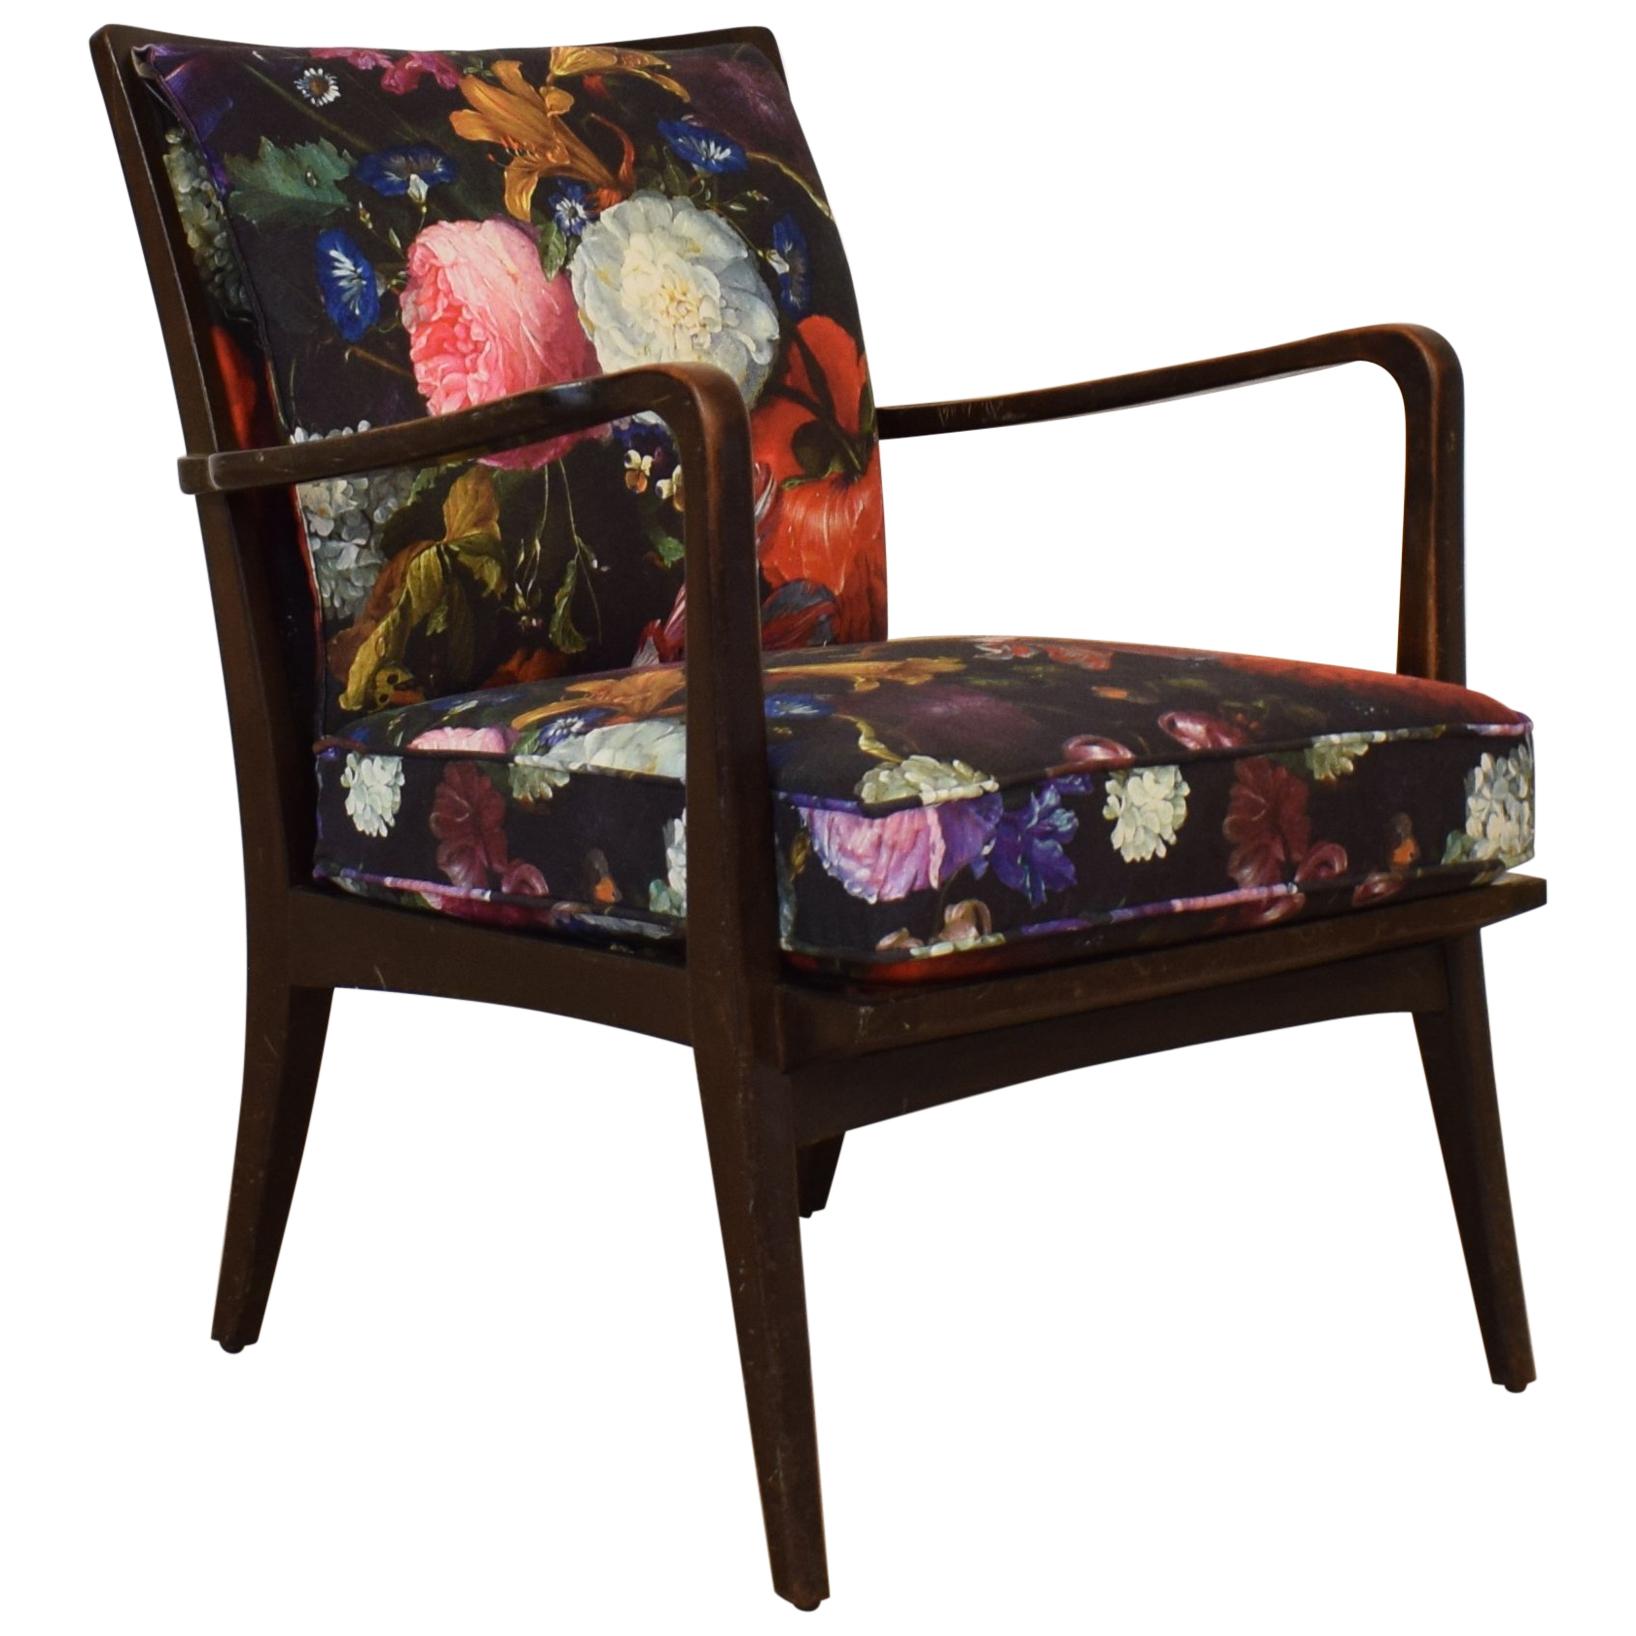 Art Deco Armchair by Knoll Antimott with Flower Upholstery, circa 1928